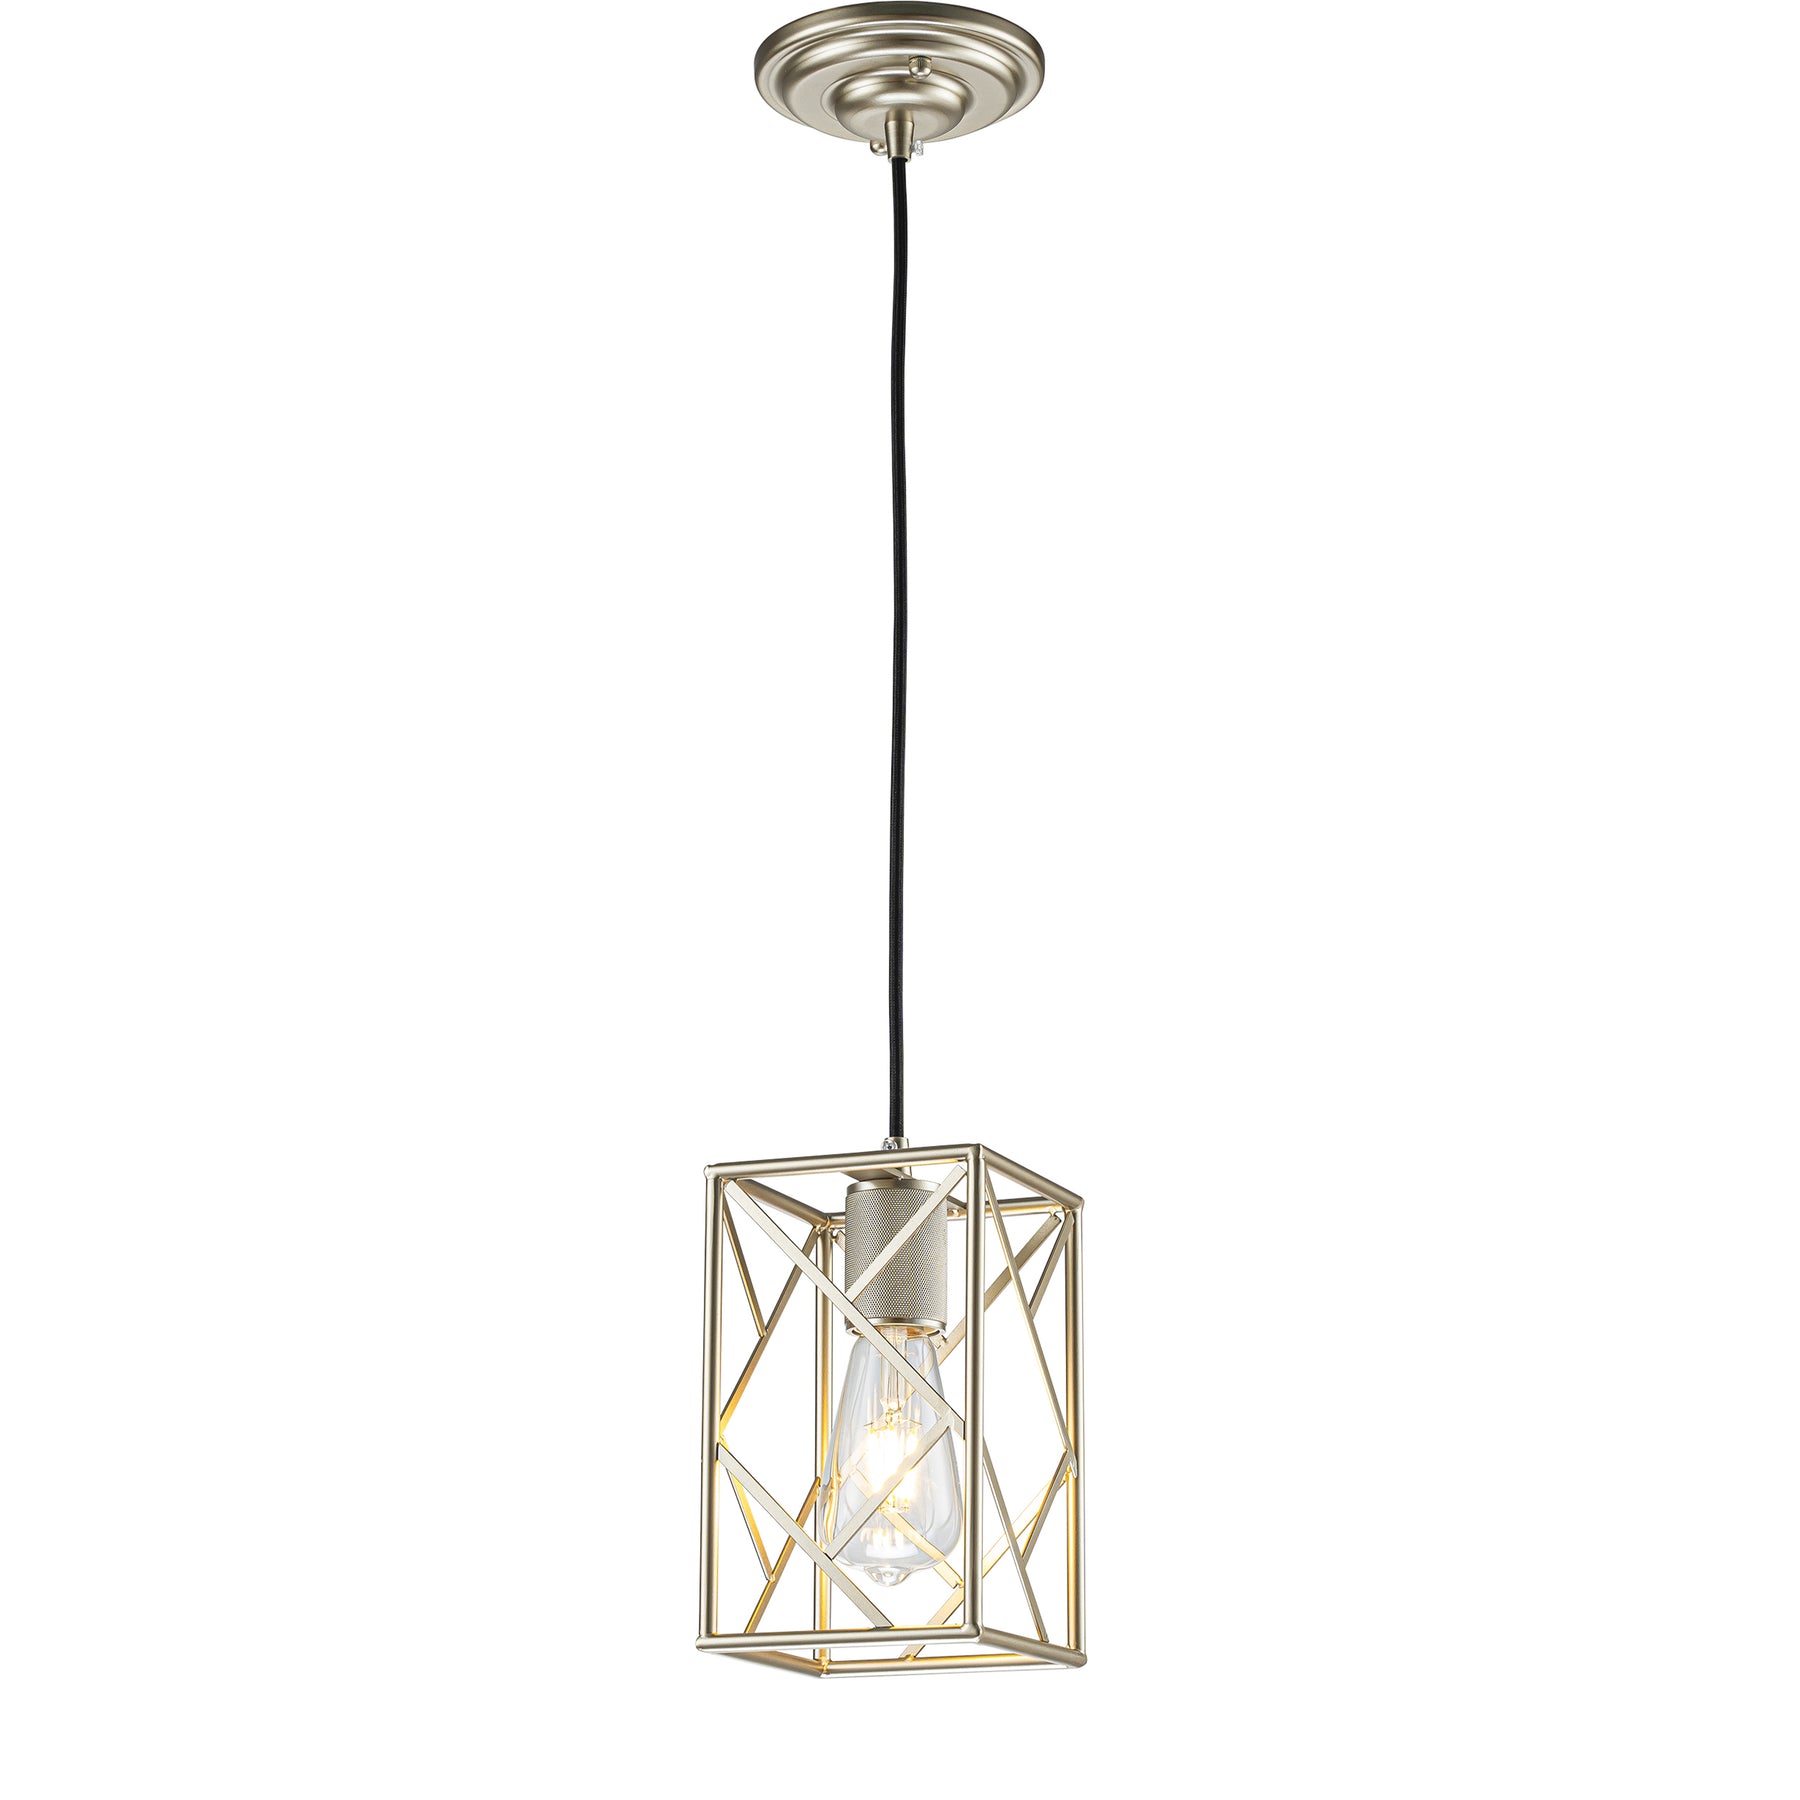 Modern Industrial Mini Square Cage Pendant Light with Wrought Iron Accents in Antique Silver